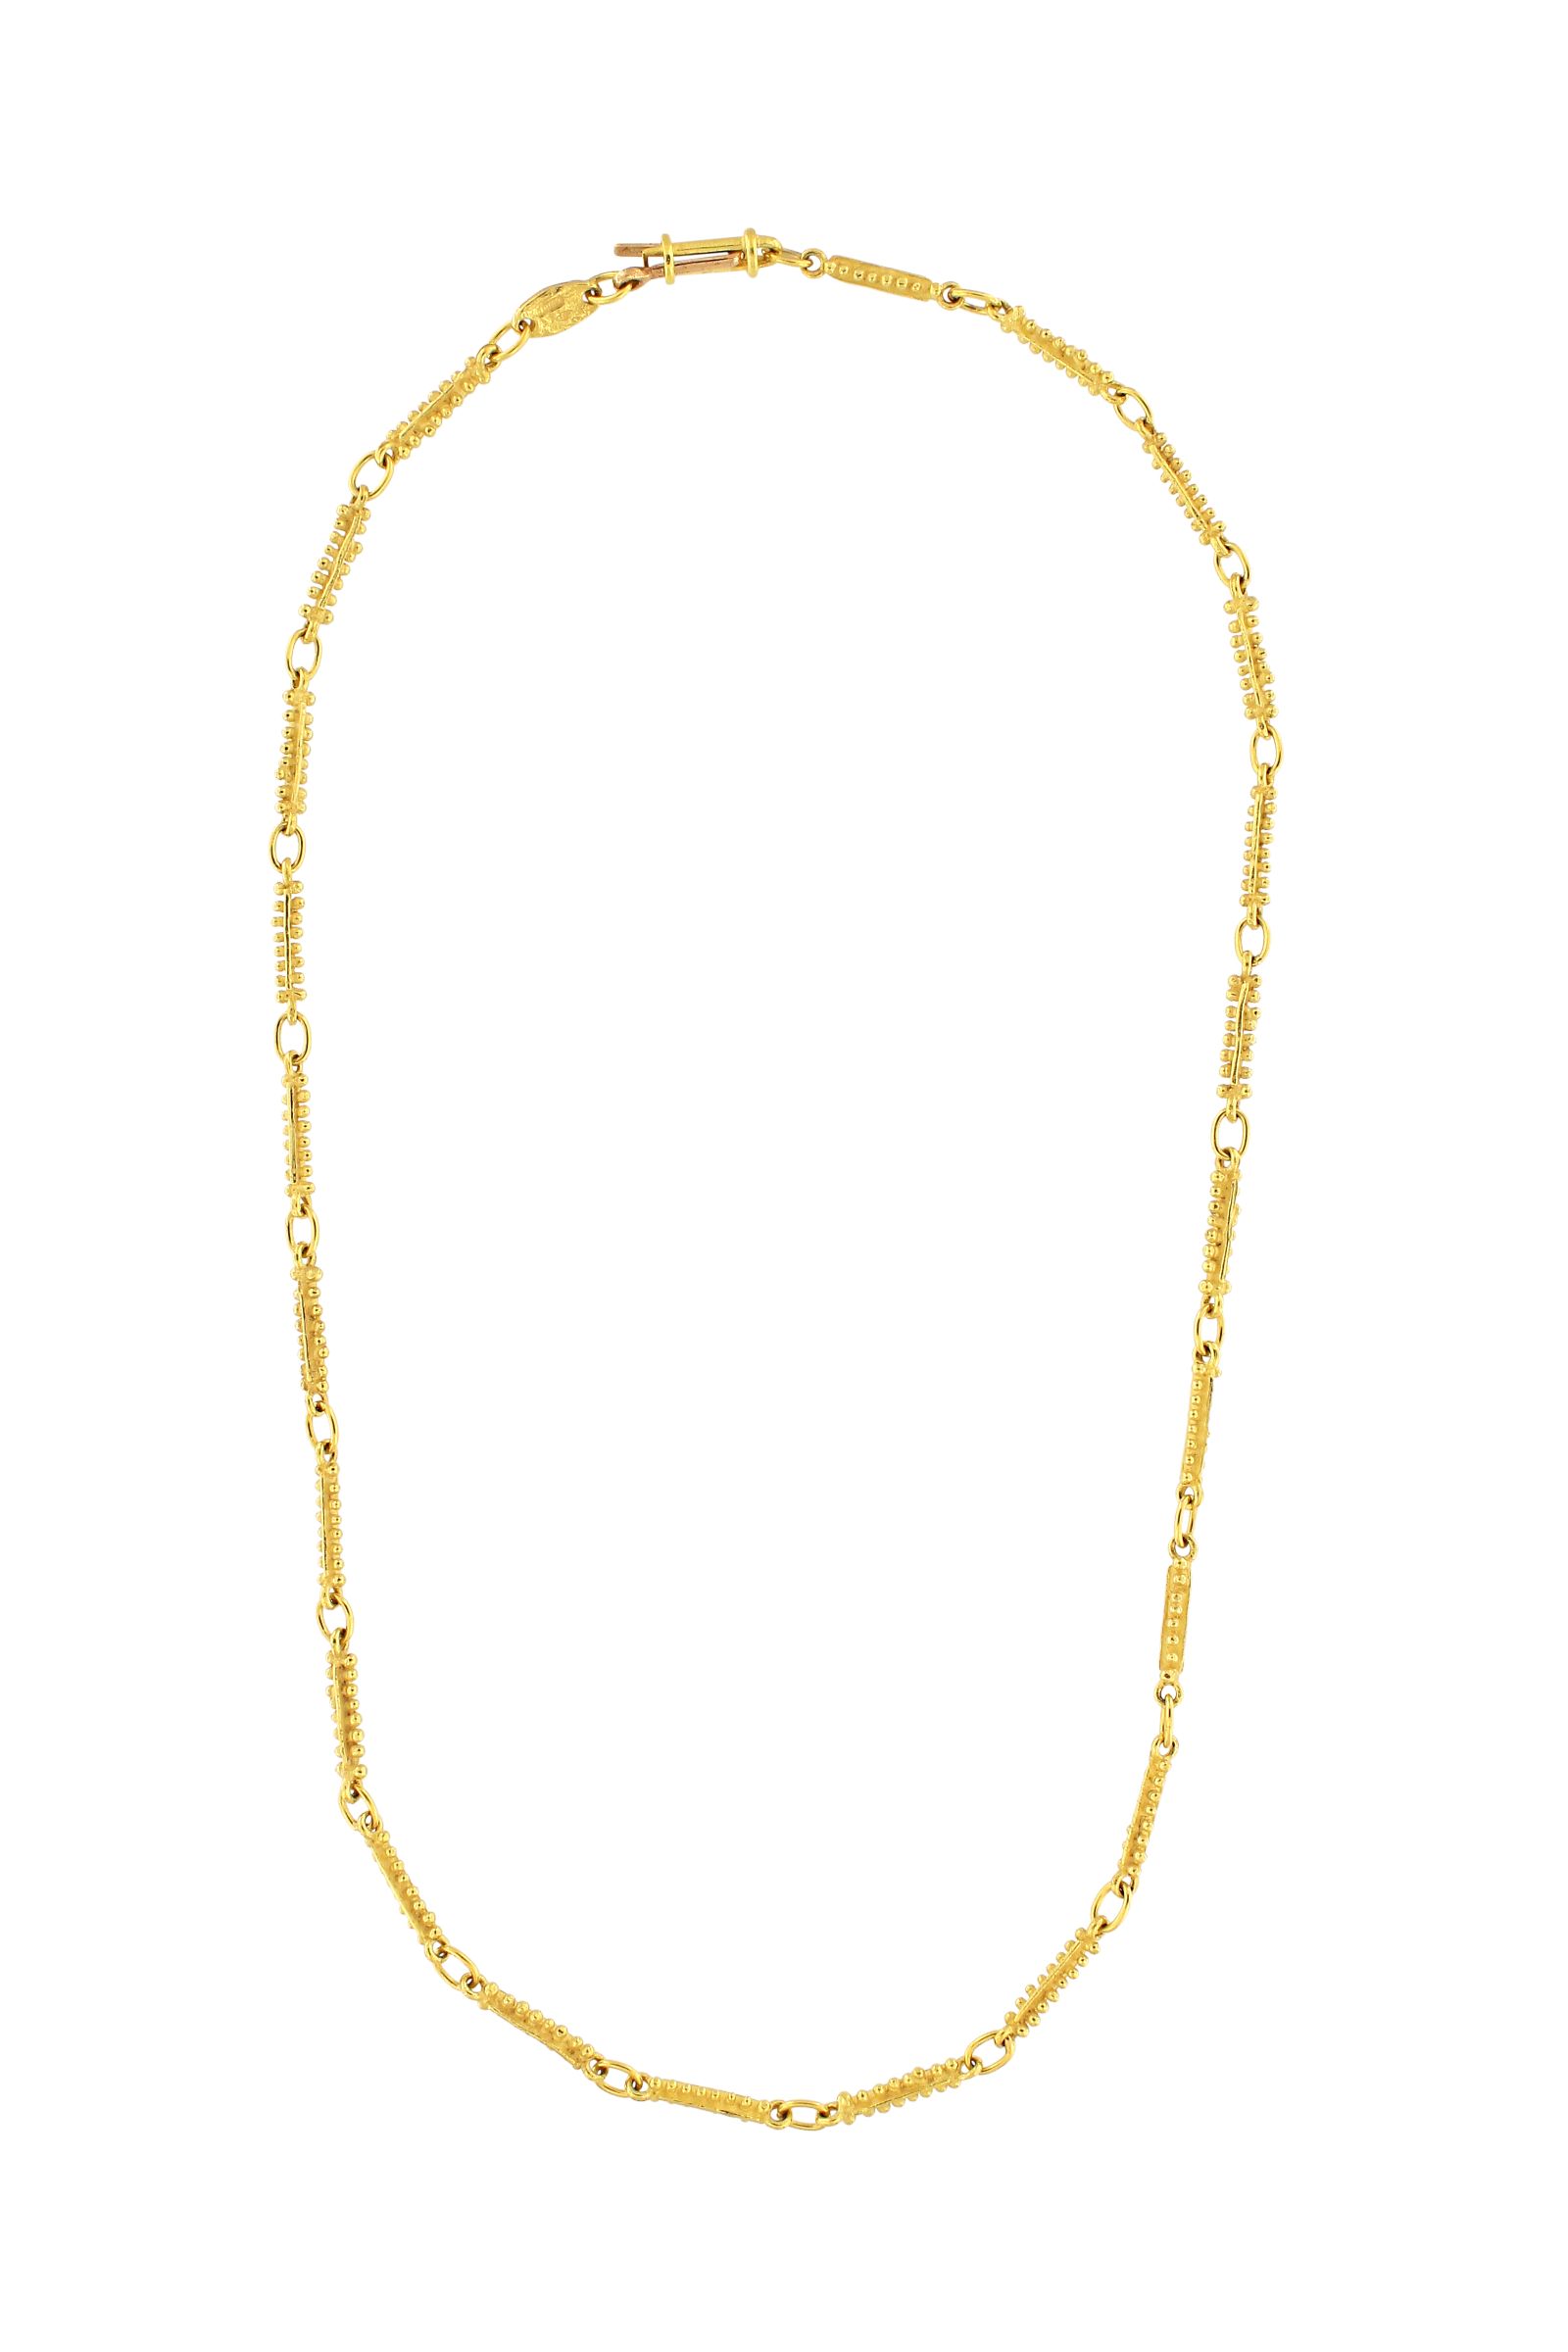 SA8A-18-Kt-Yellow-Gold-Chain-Necklace-1